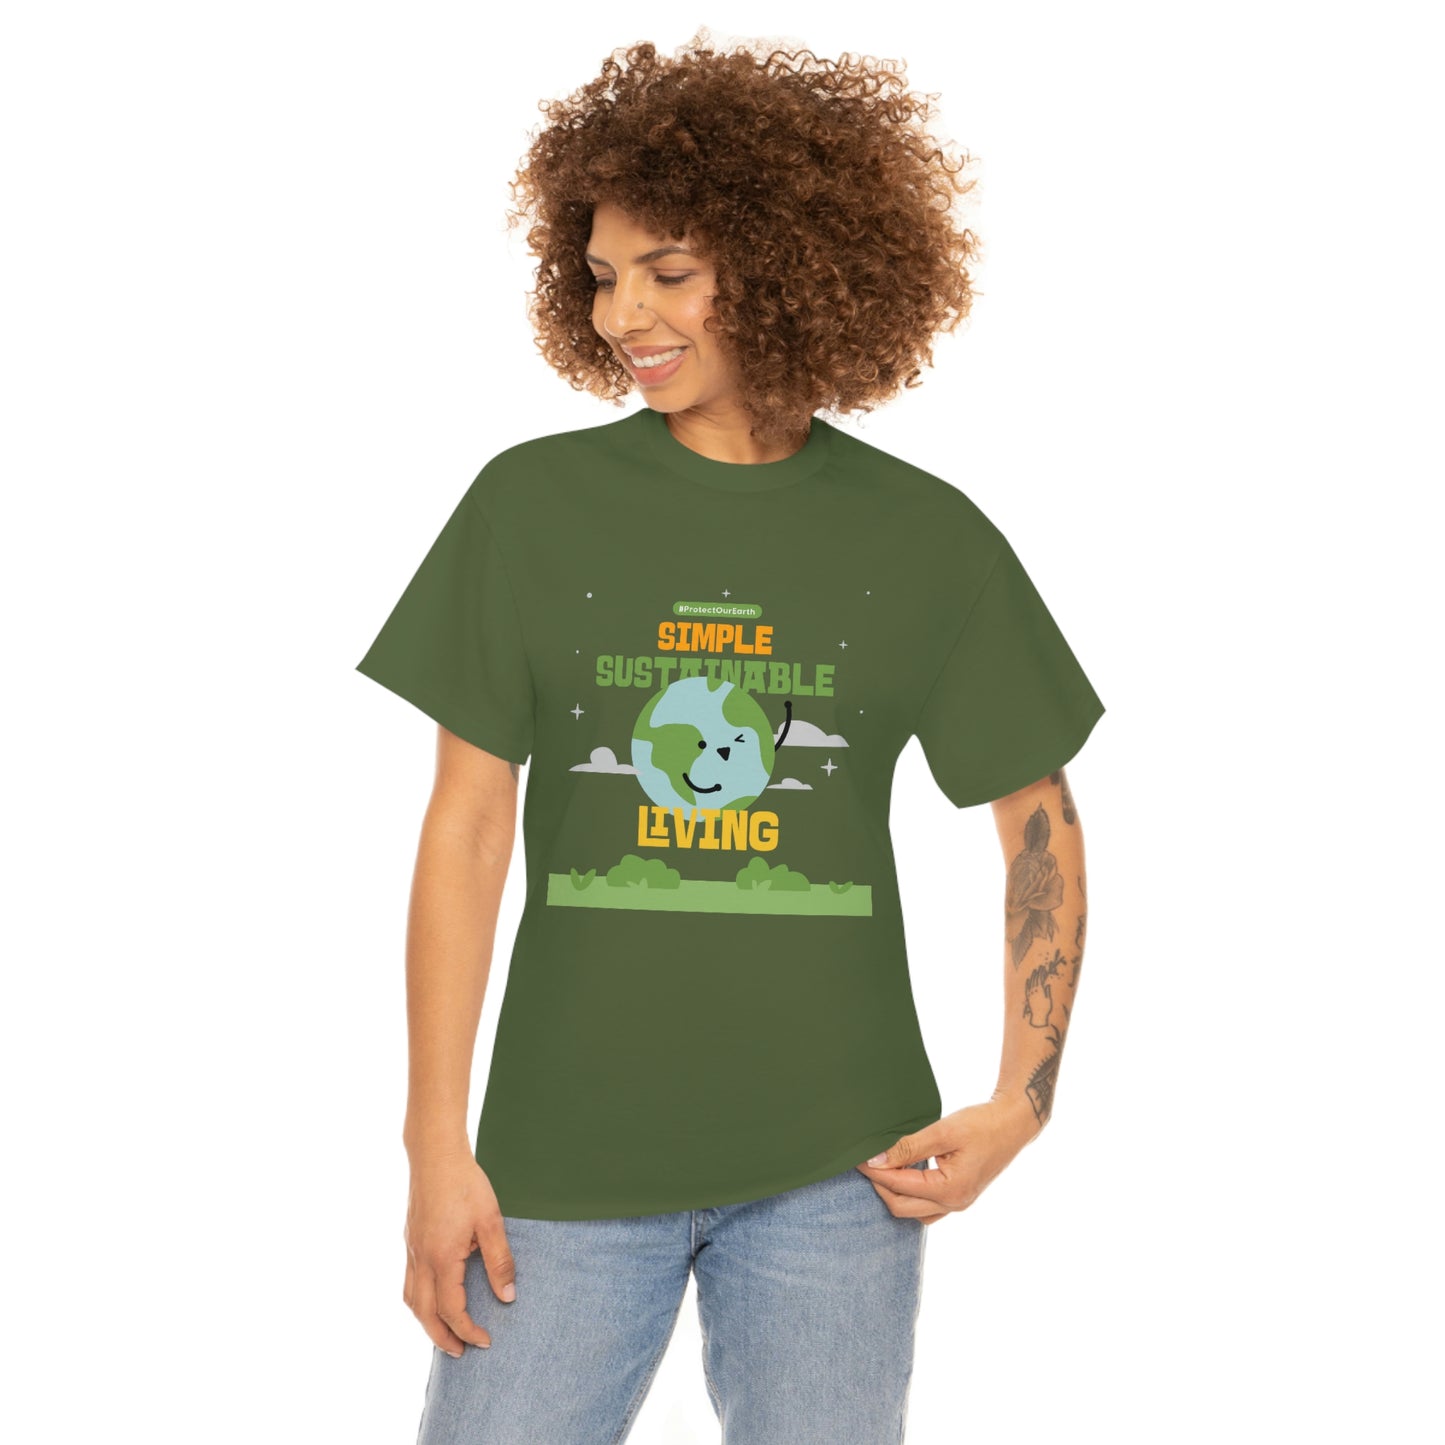 Mock up of a slim woman wearing the green shirt